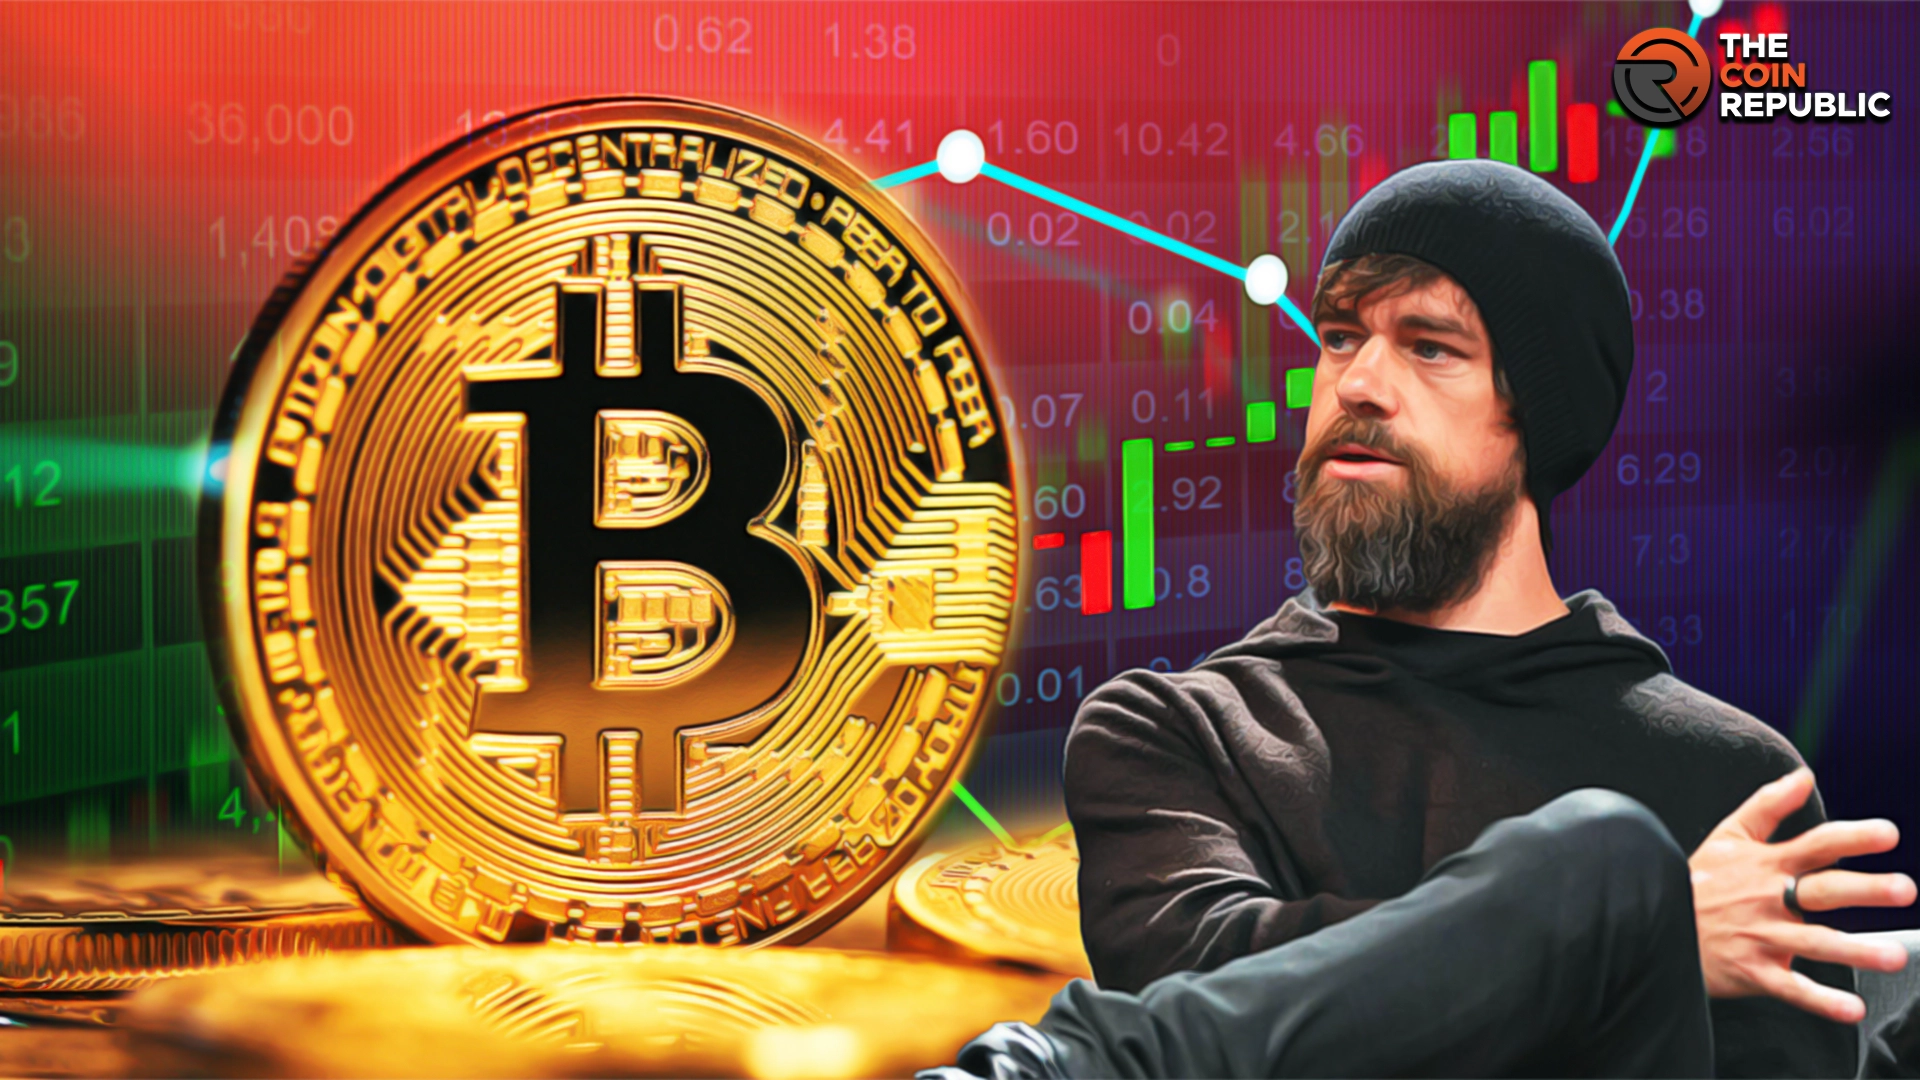 Bitcoin Will Be Worth $1 Million By 2030: Predicts Jack Dorsey